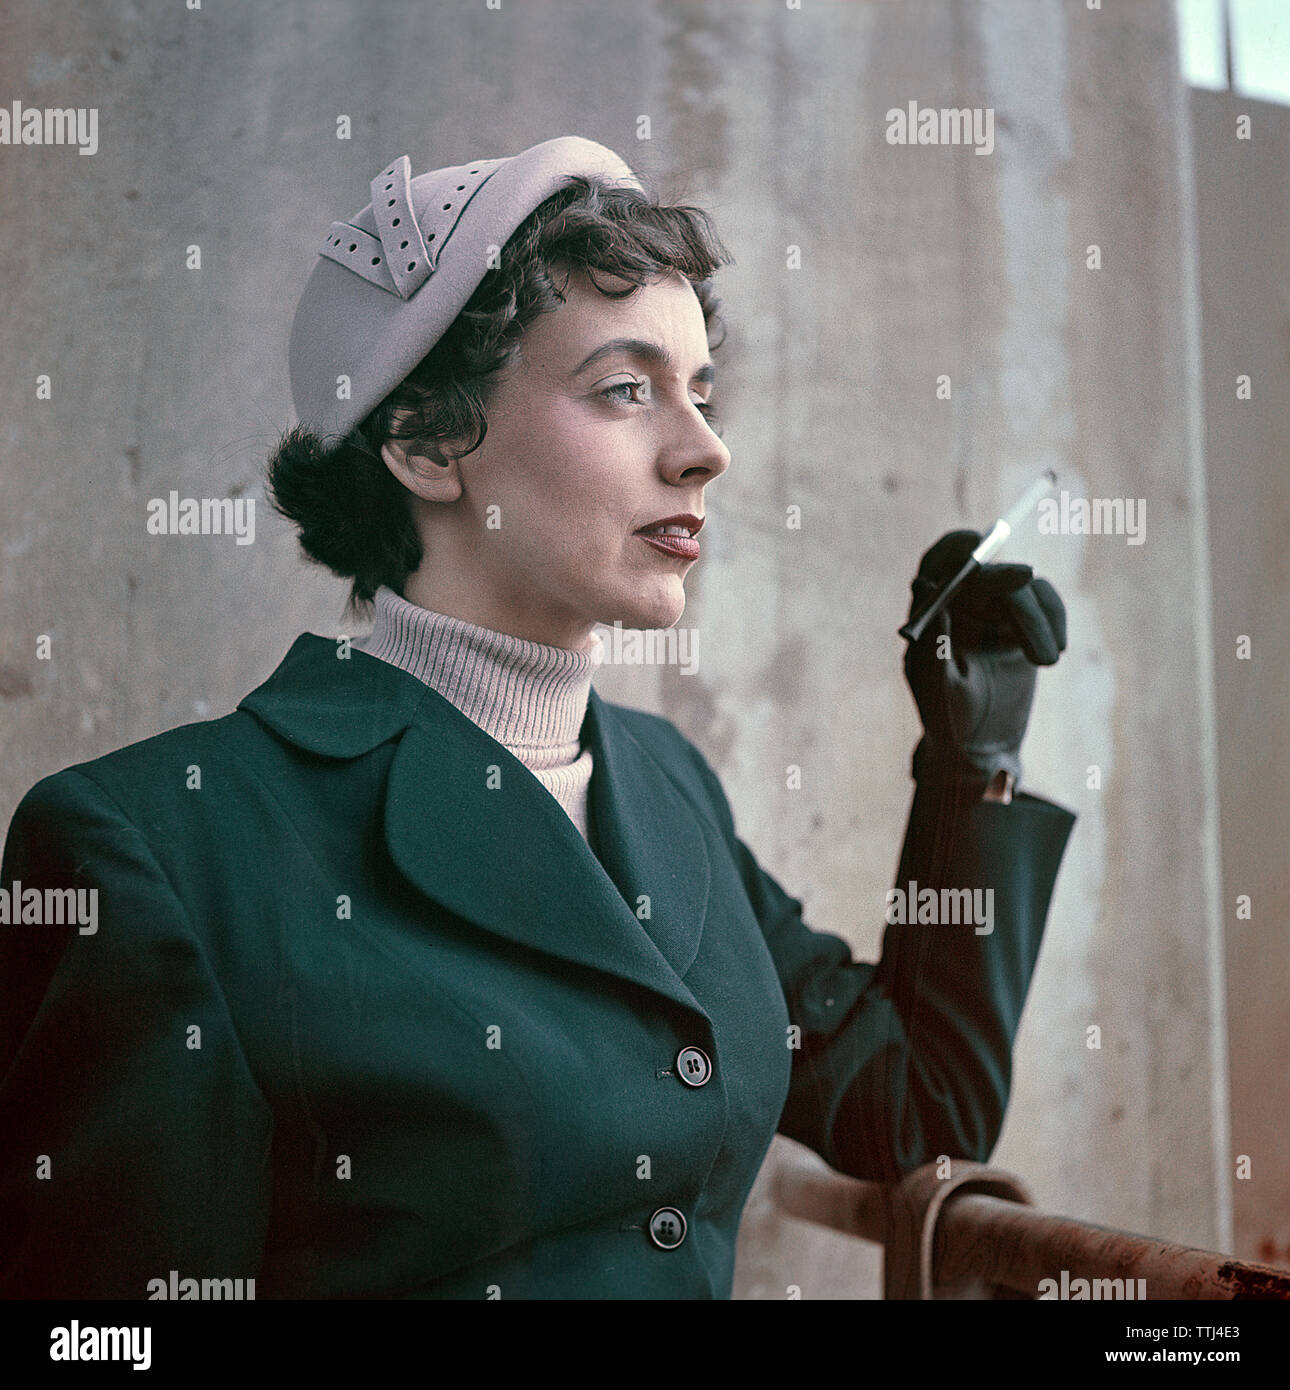 1950s women's fashion. A swedish young woman wearing a typical 50s outfit. A green jacket and a matching hat. She uses a cigarette holder.  Sweden 1950s.  CV5-11 Stock Photo